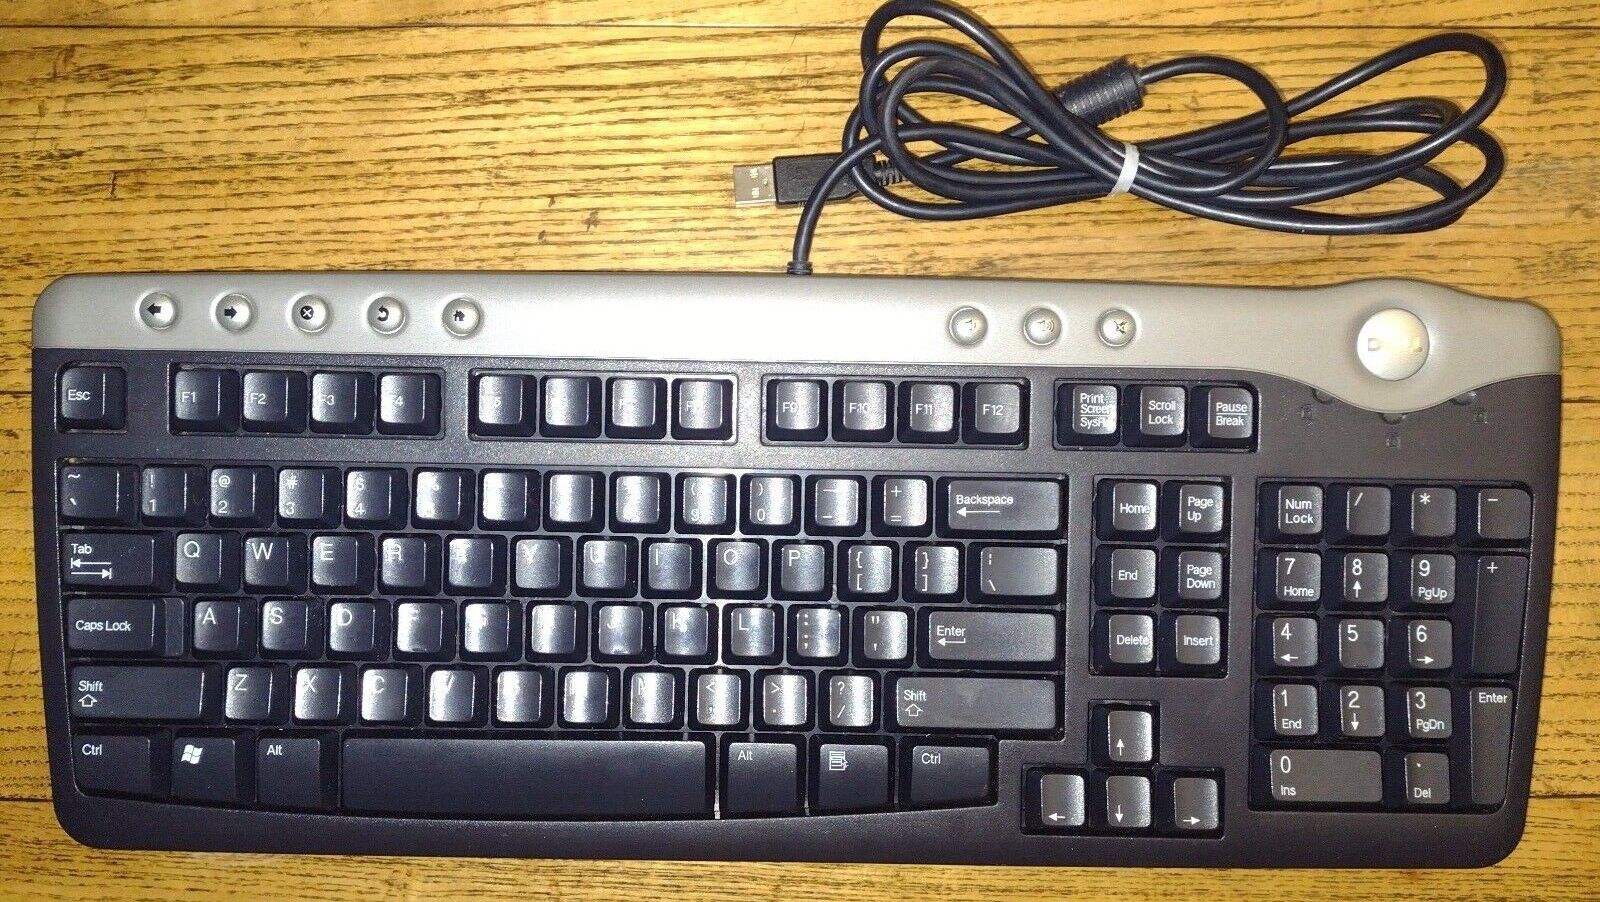 GENUINE Dell Enhanced Multimedia Keyboard, Wired USB, SK-8125, Clean Tested